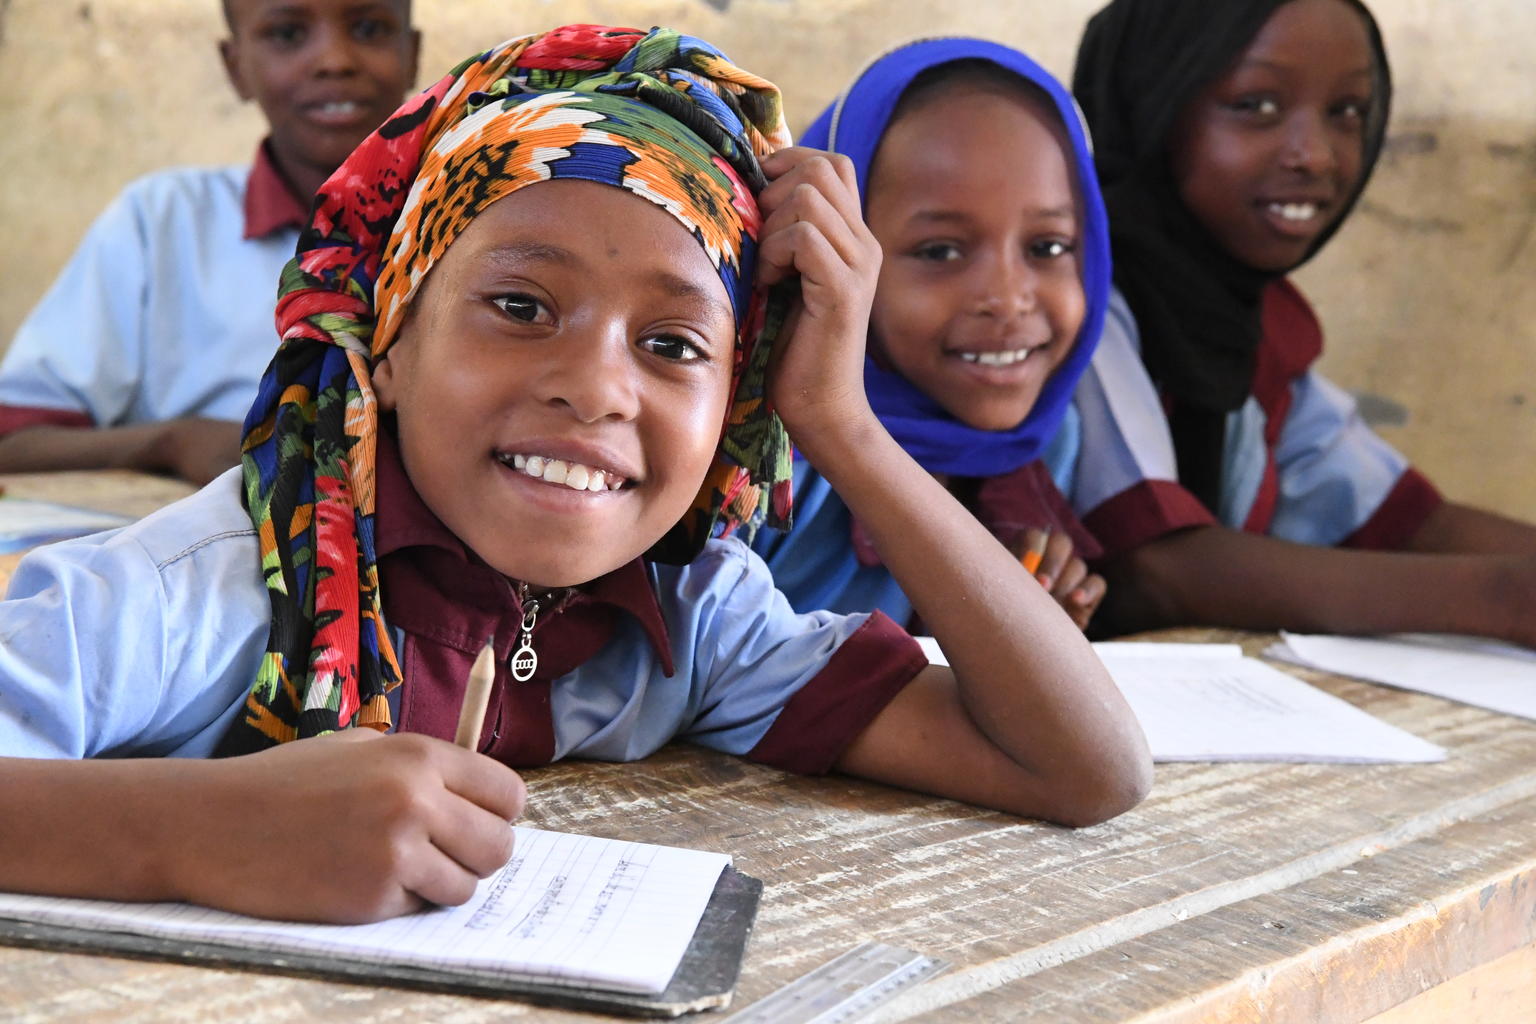 Children smile in a classroom in Chad.